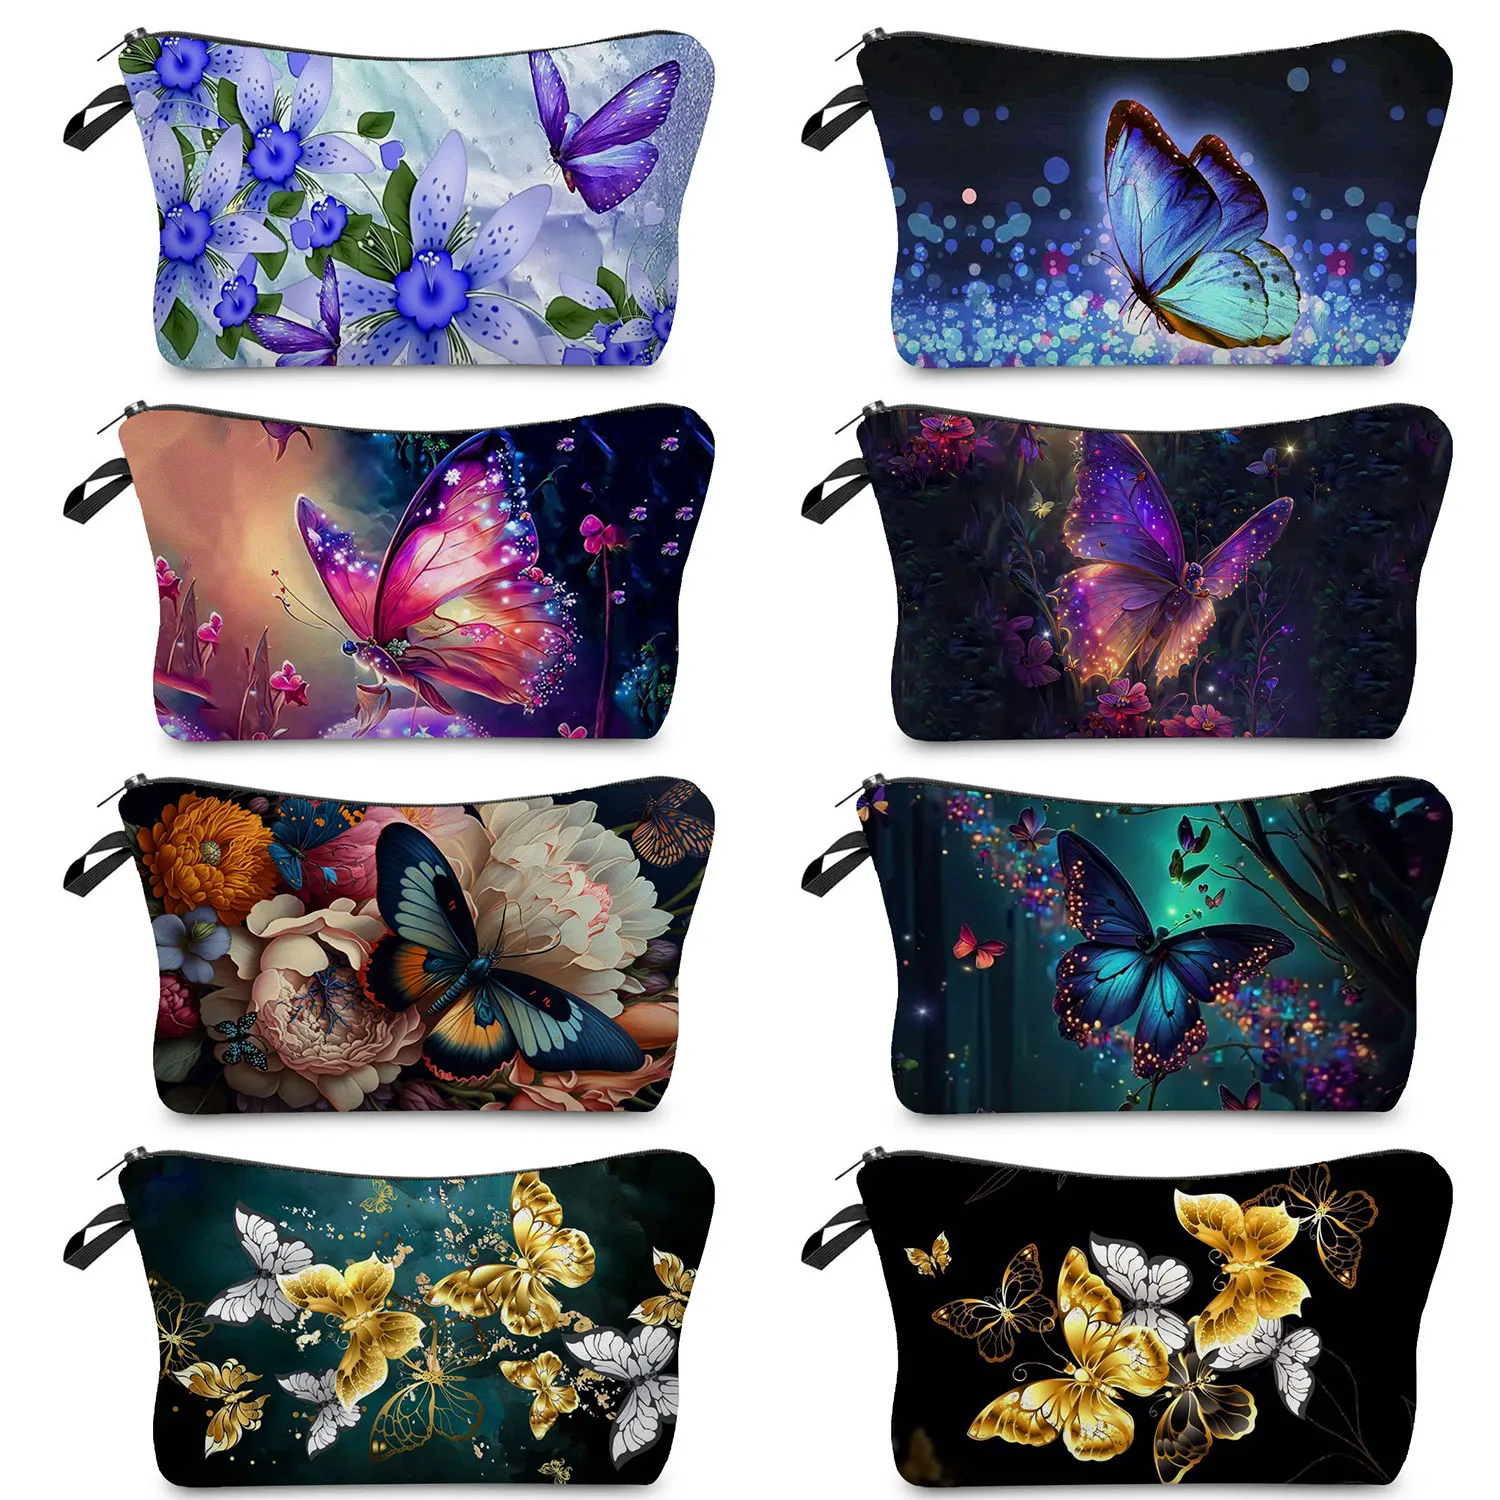 

Women's Cosmetic Case Portable High Quality Pencil Cases Toiletry Storage Bags Pretty Butterfly Printed Heat Transfer Makeup Bag